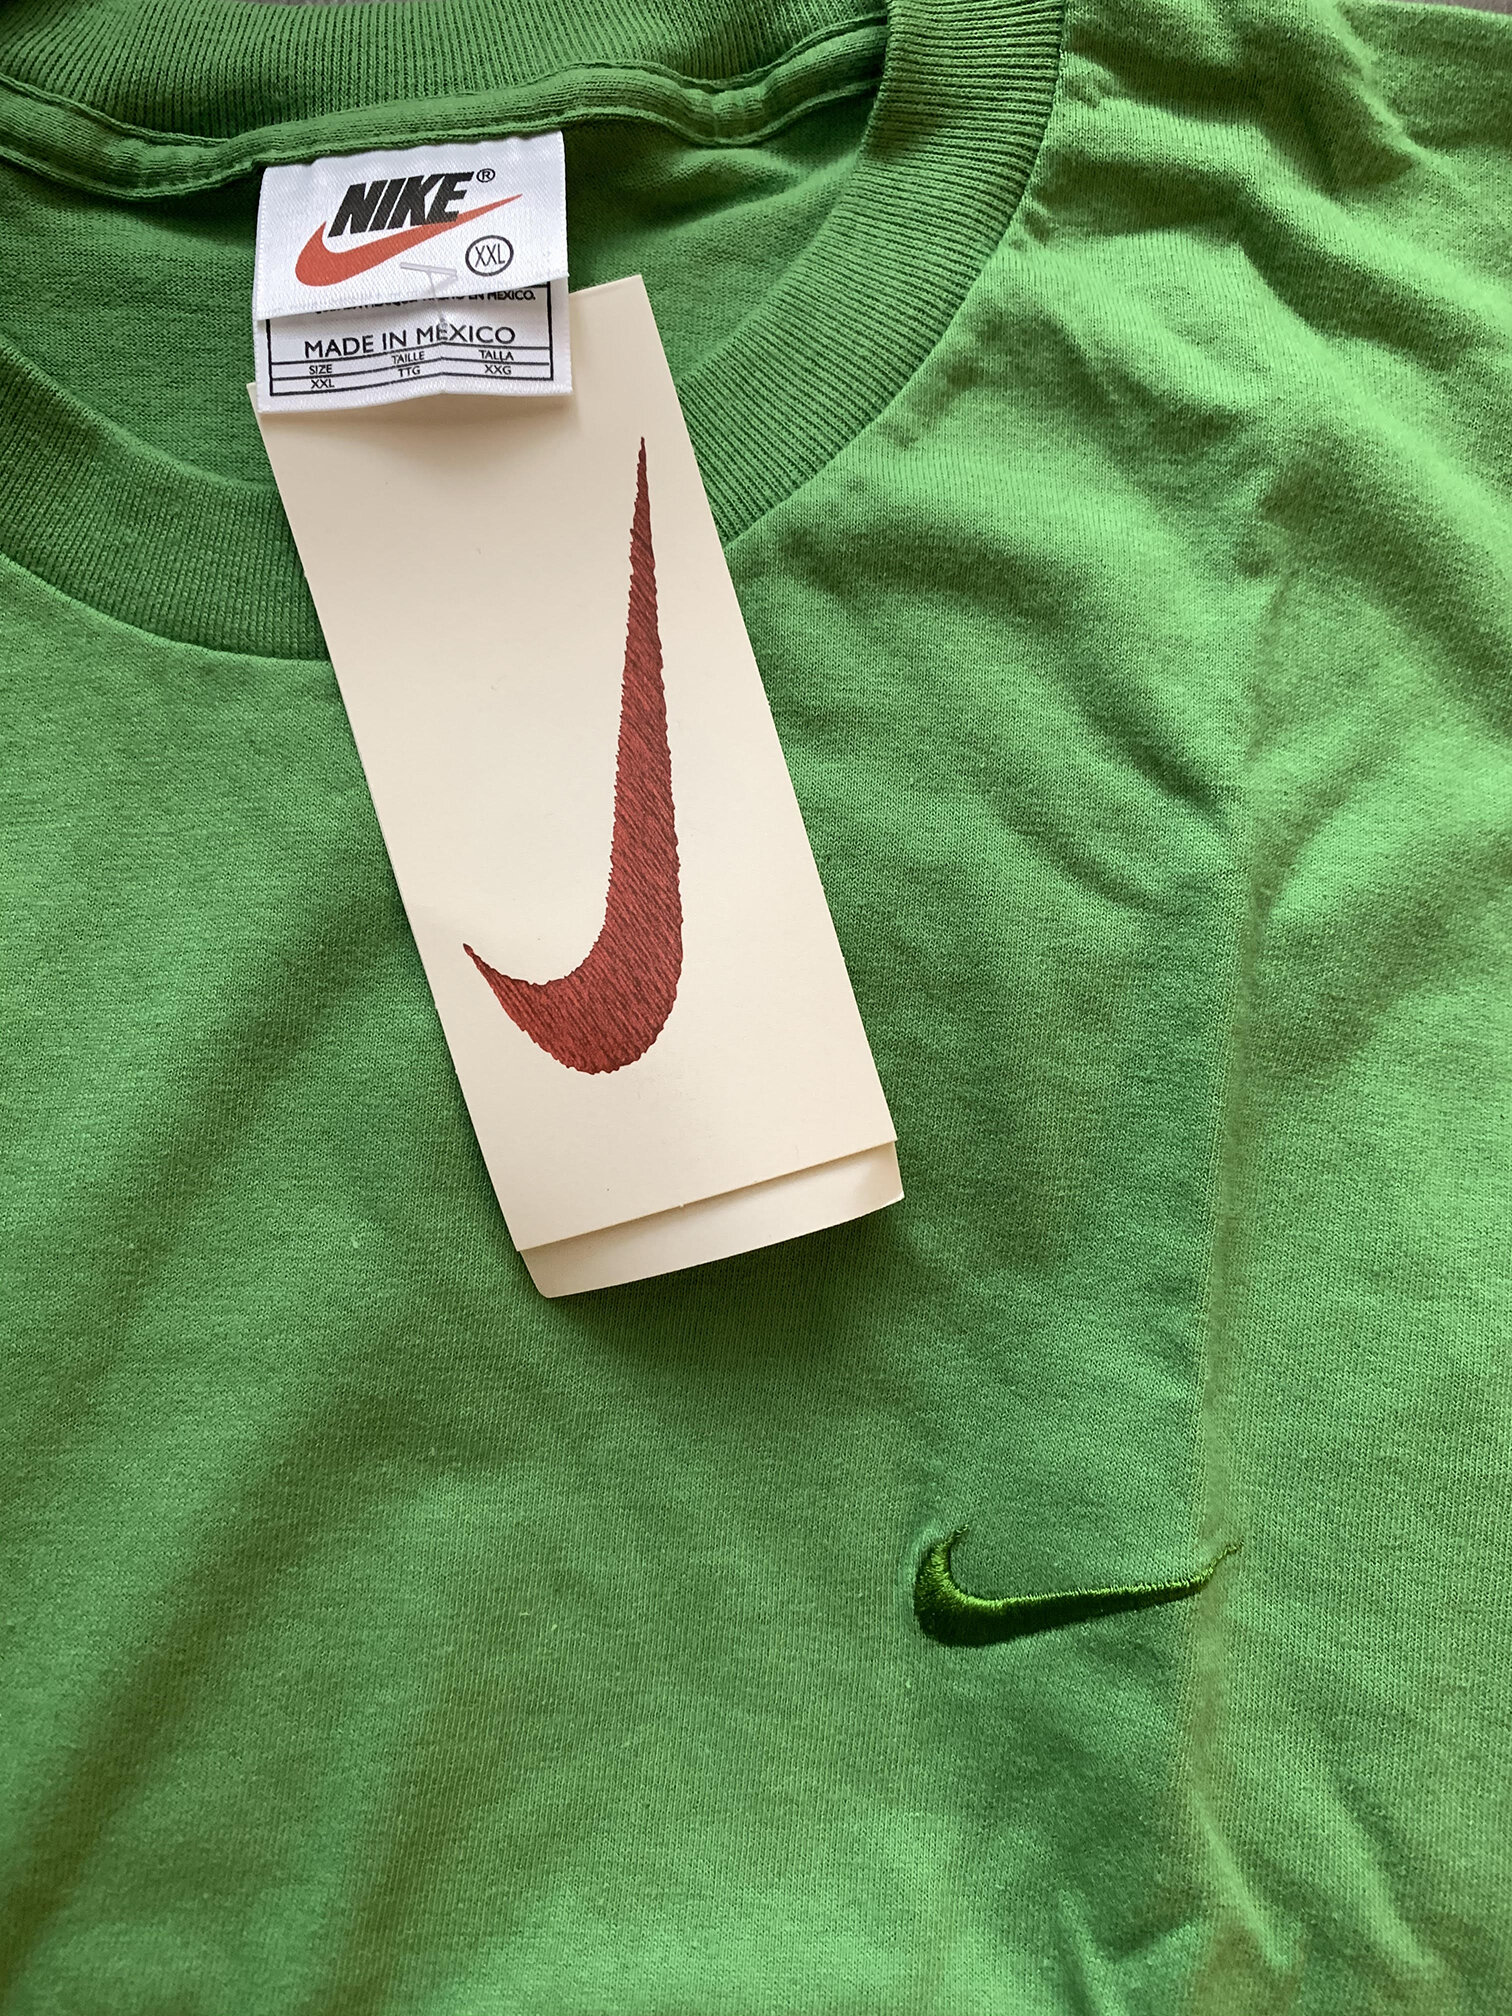 lime green and red nike shirt